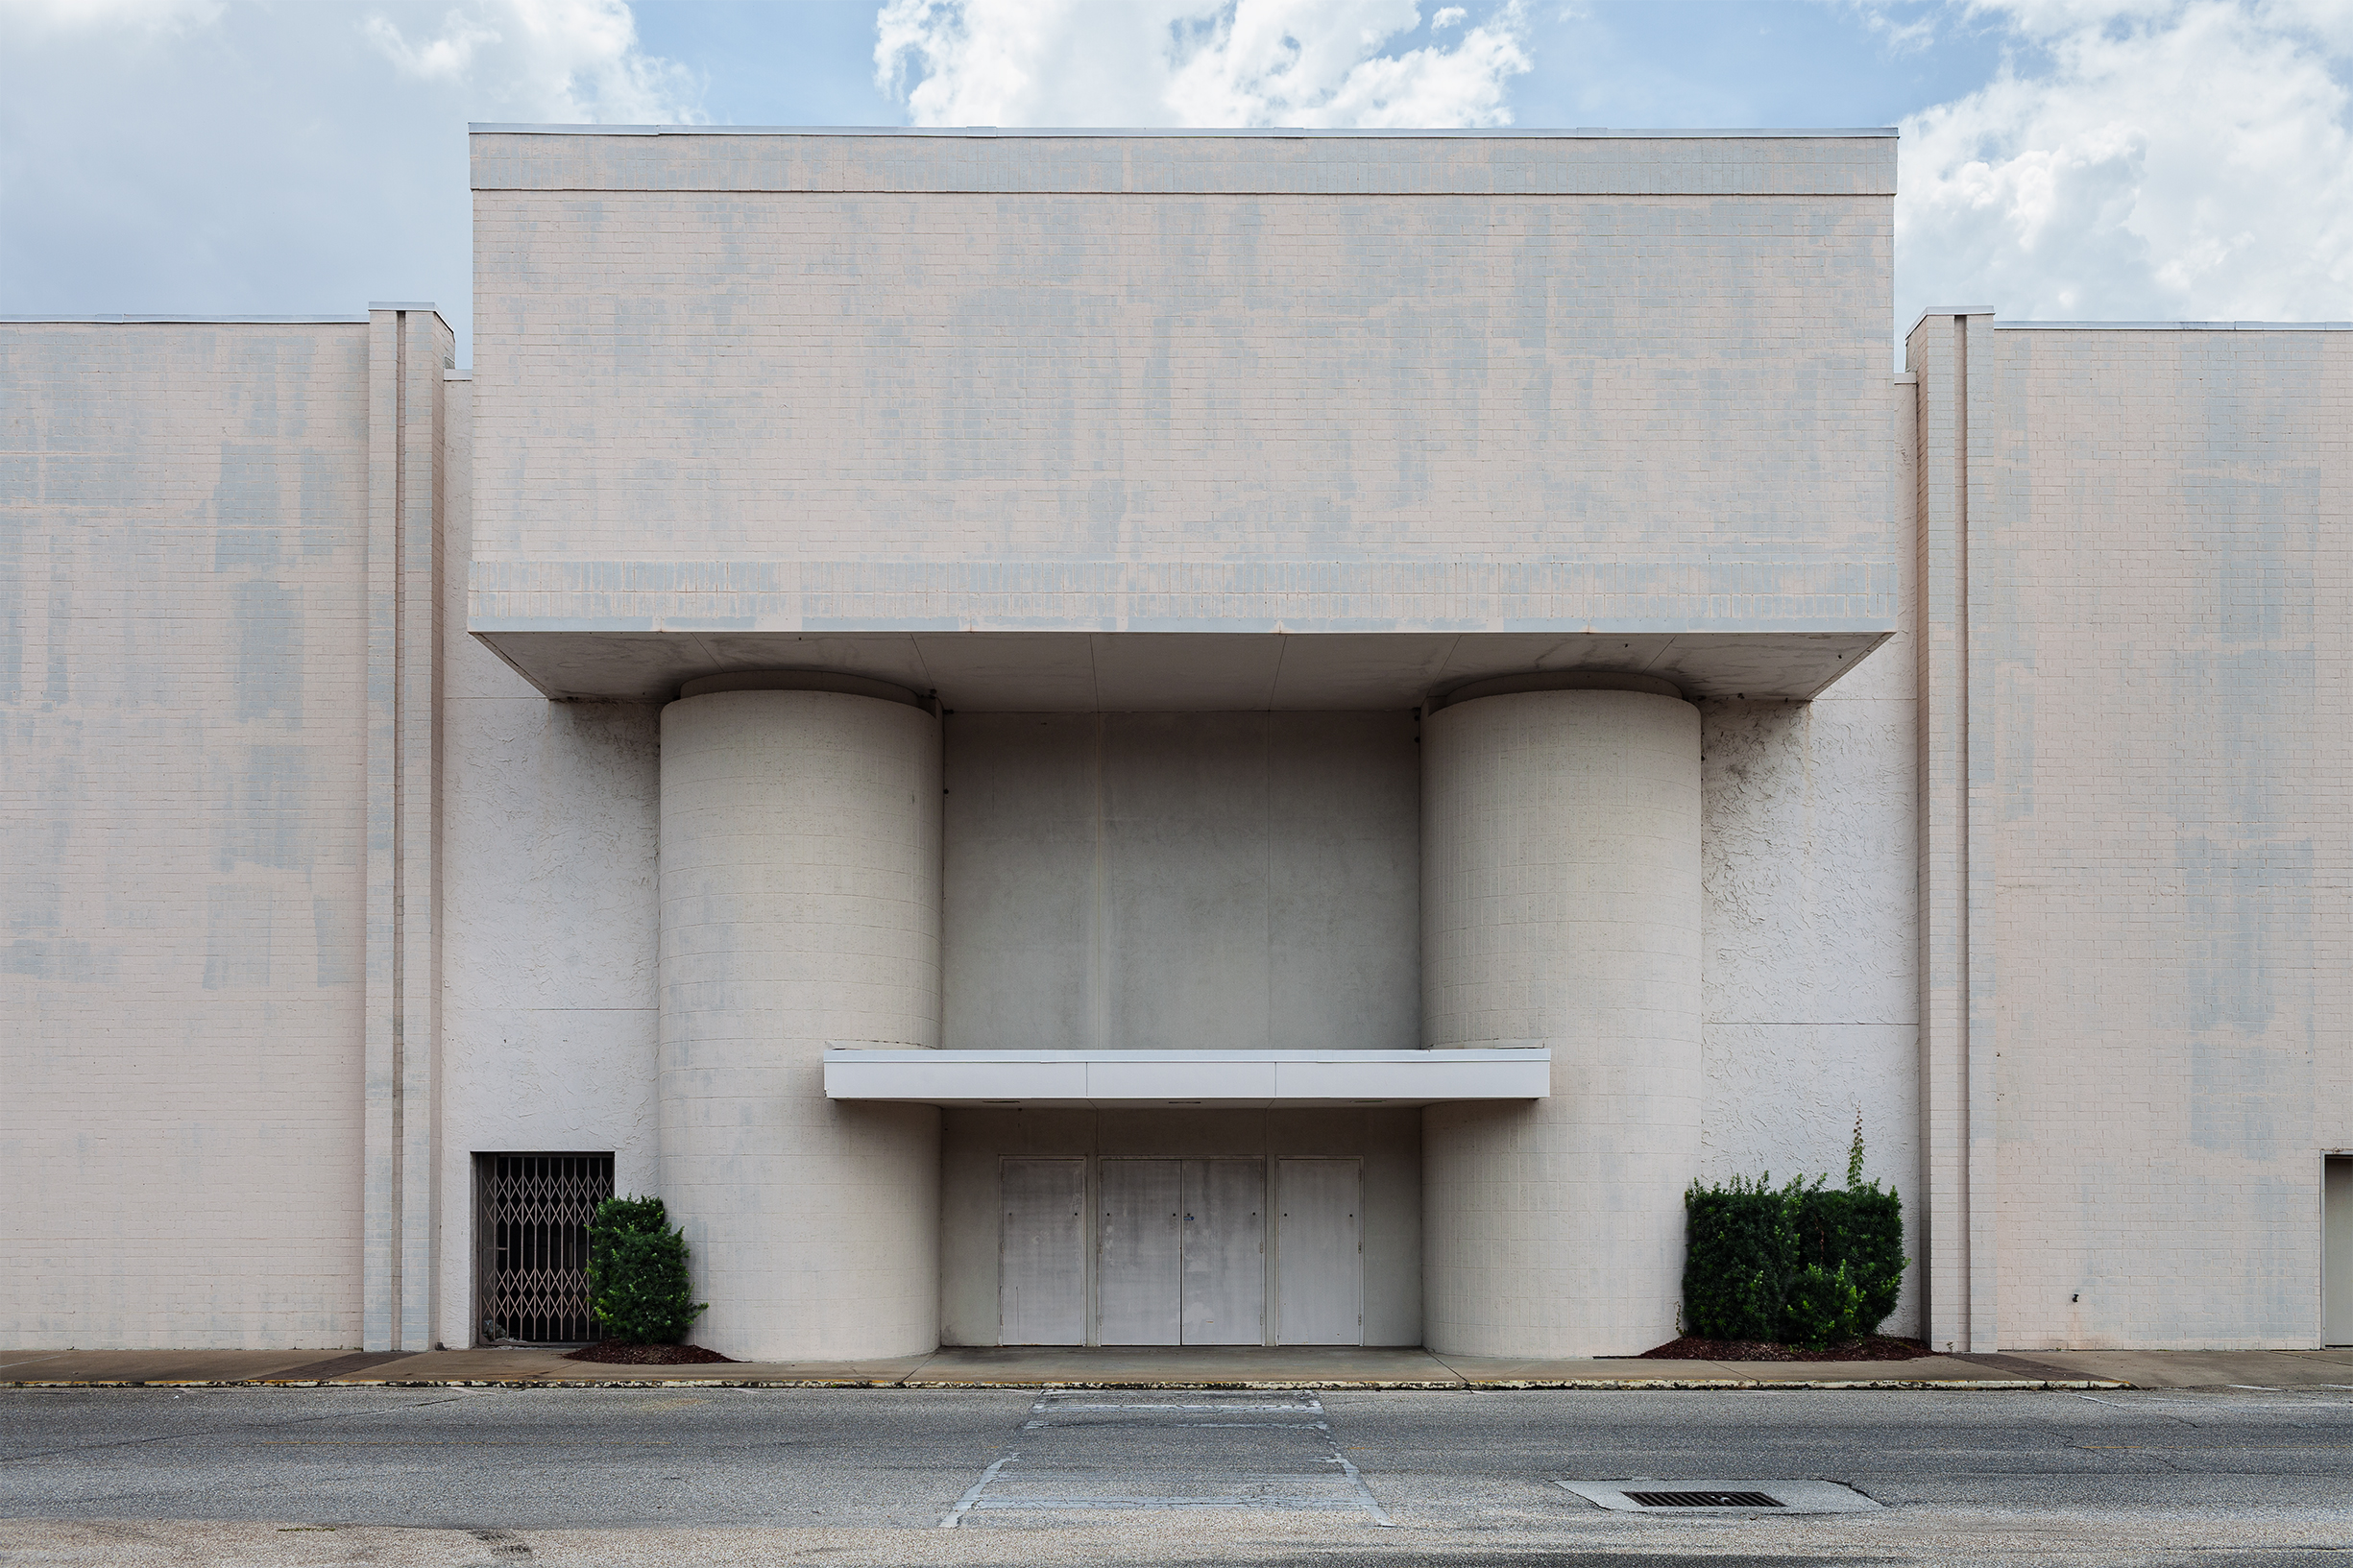 The exterior of the Springdale Mall in Mobile, AL on July 9, 2017. (Brian Ulrich for TIME)